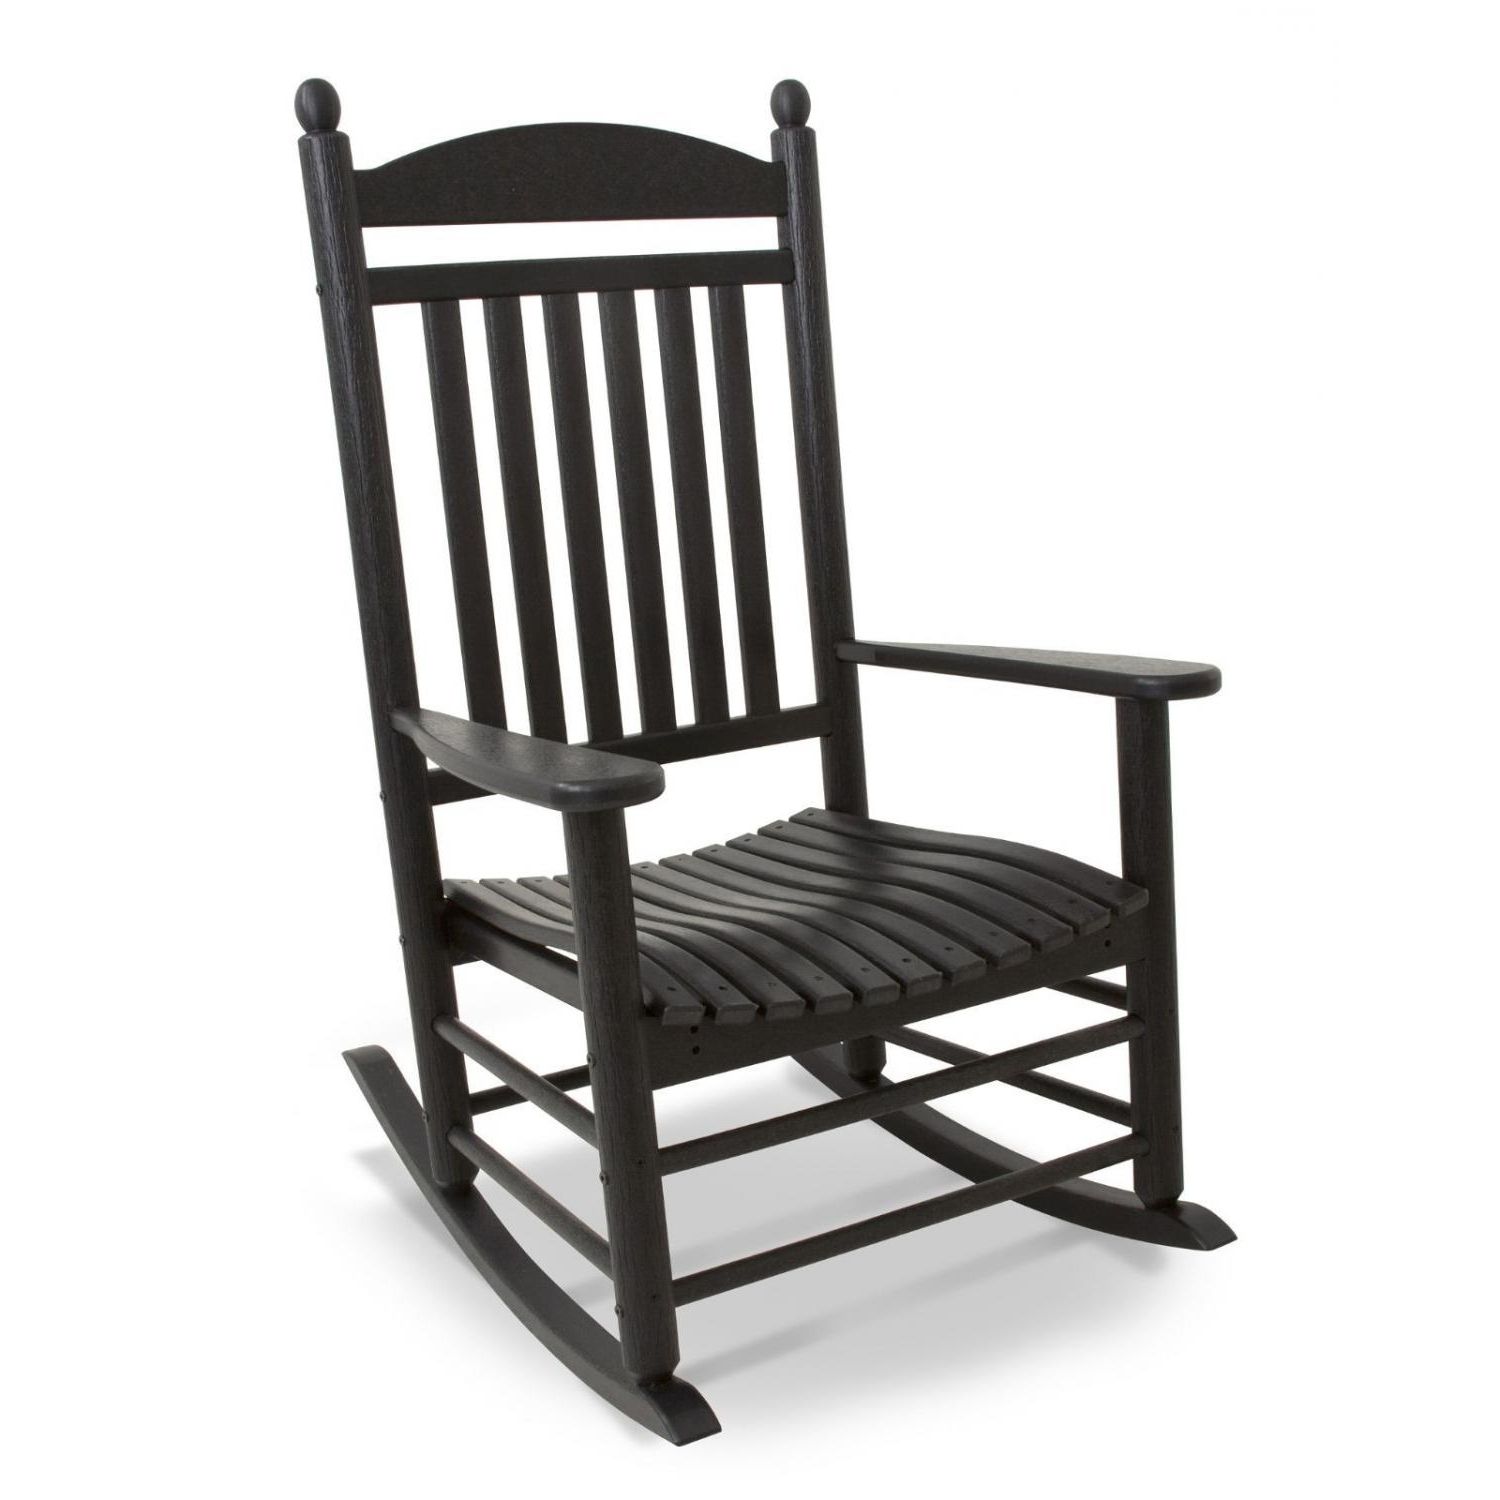 Wooden Patio Rocking Chairs Pertaining To Recent Polywood Jefferson Recycled Plastic Wood Patio Rocking Chair – Black (View 11 of 15)